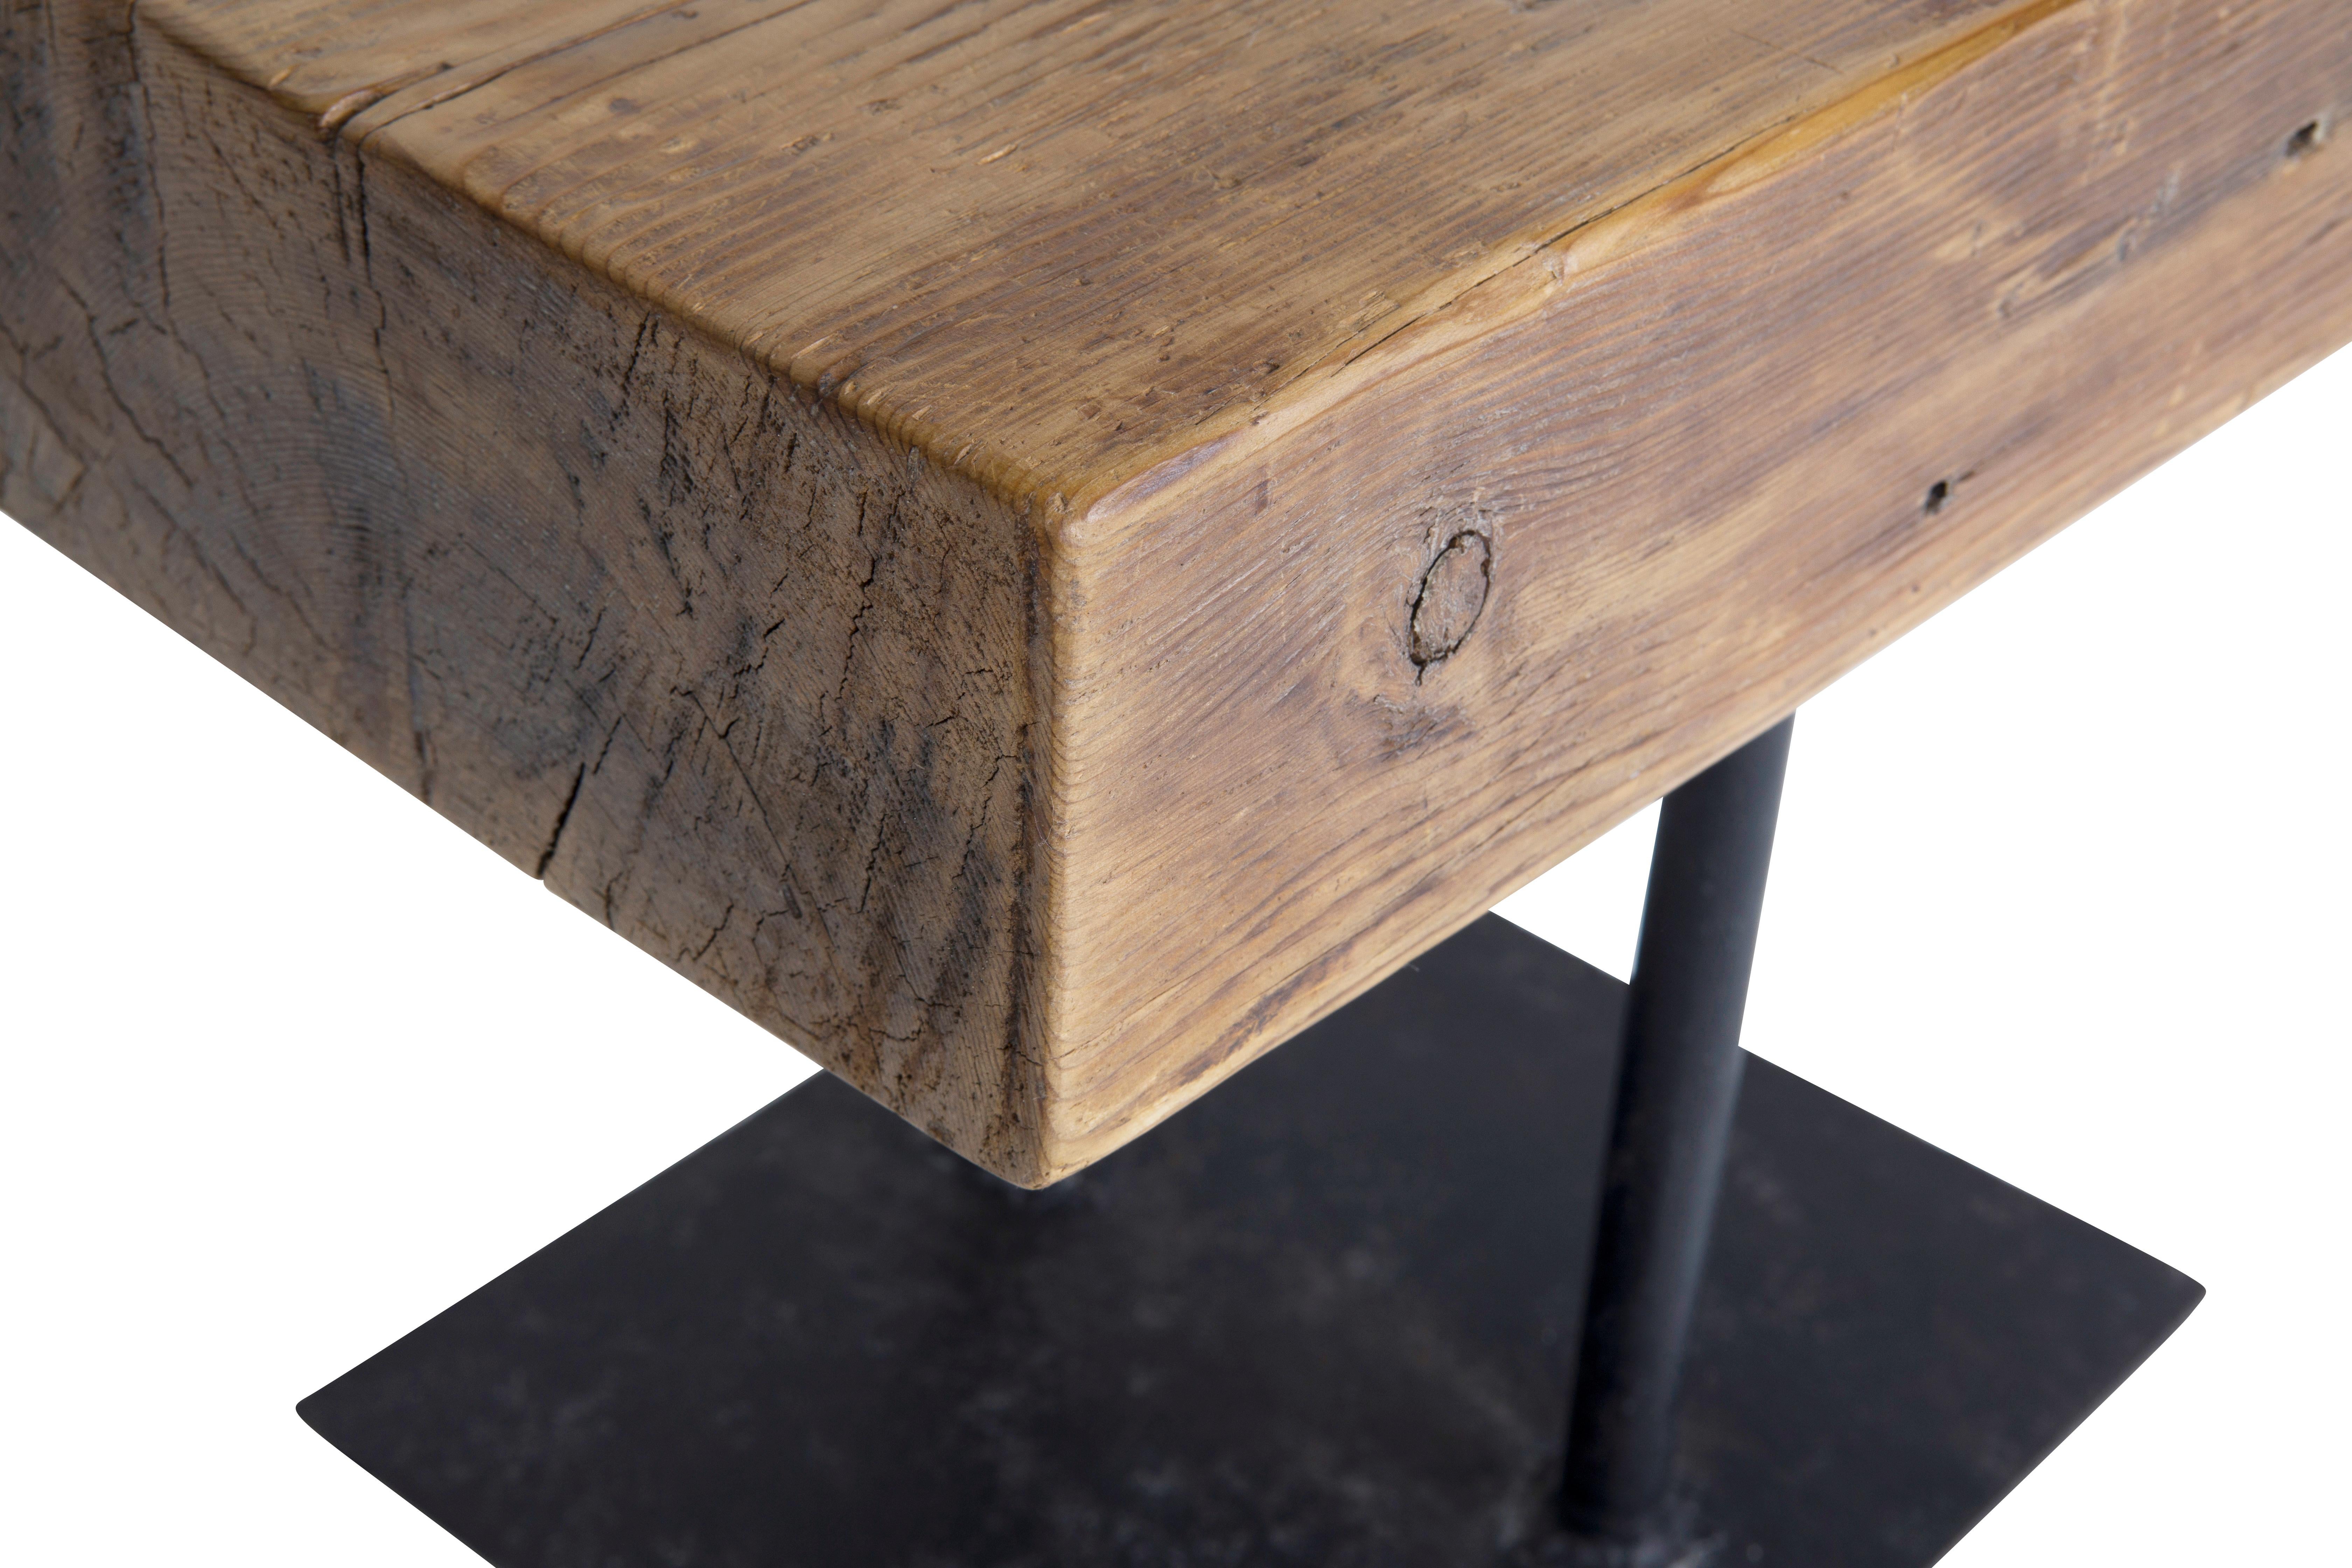 This reclaimed wood top is hand cut from a thick beam. Paired with an artisan welded steel base.

The piece is a part of our one-of-a-kind collection, Le Monde. Exclusive to Brendan Bass. 

Globally curated by Brendan Bass, Le Monde furniture